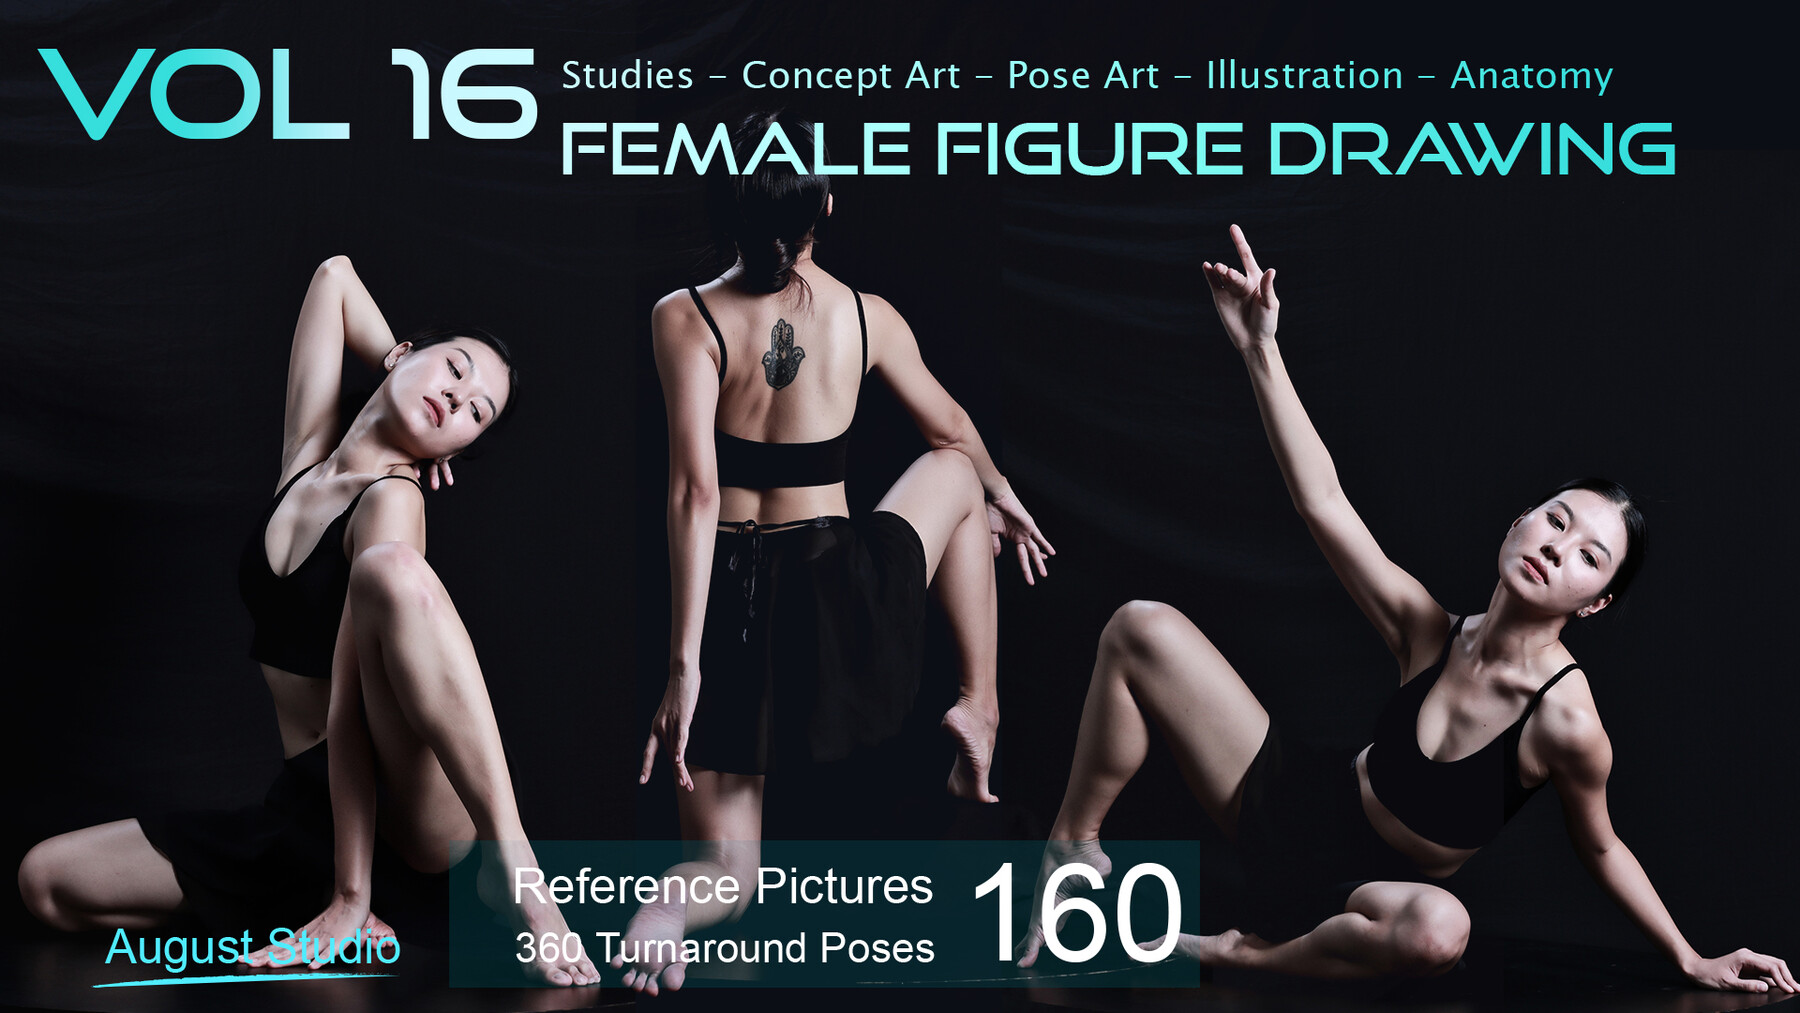 ArtStation - Female Figure Drawing - Vol 16 - Reference Pictures